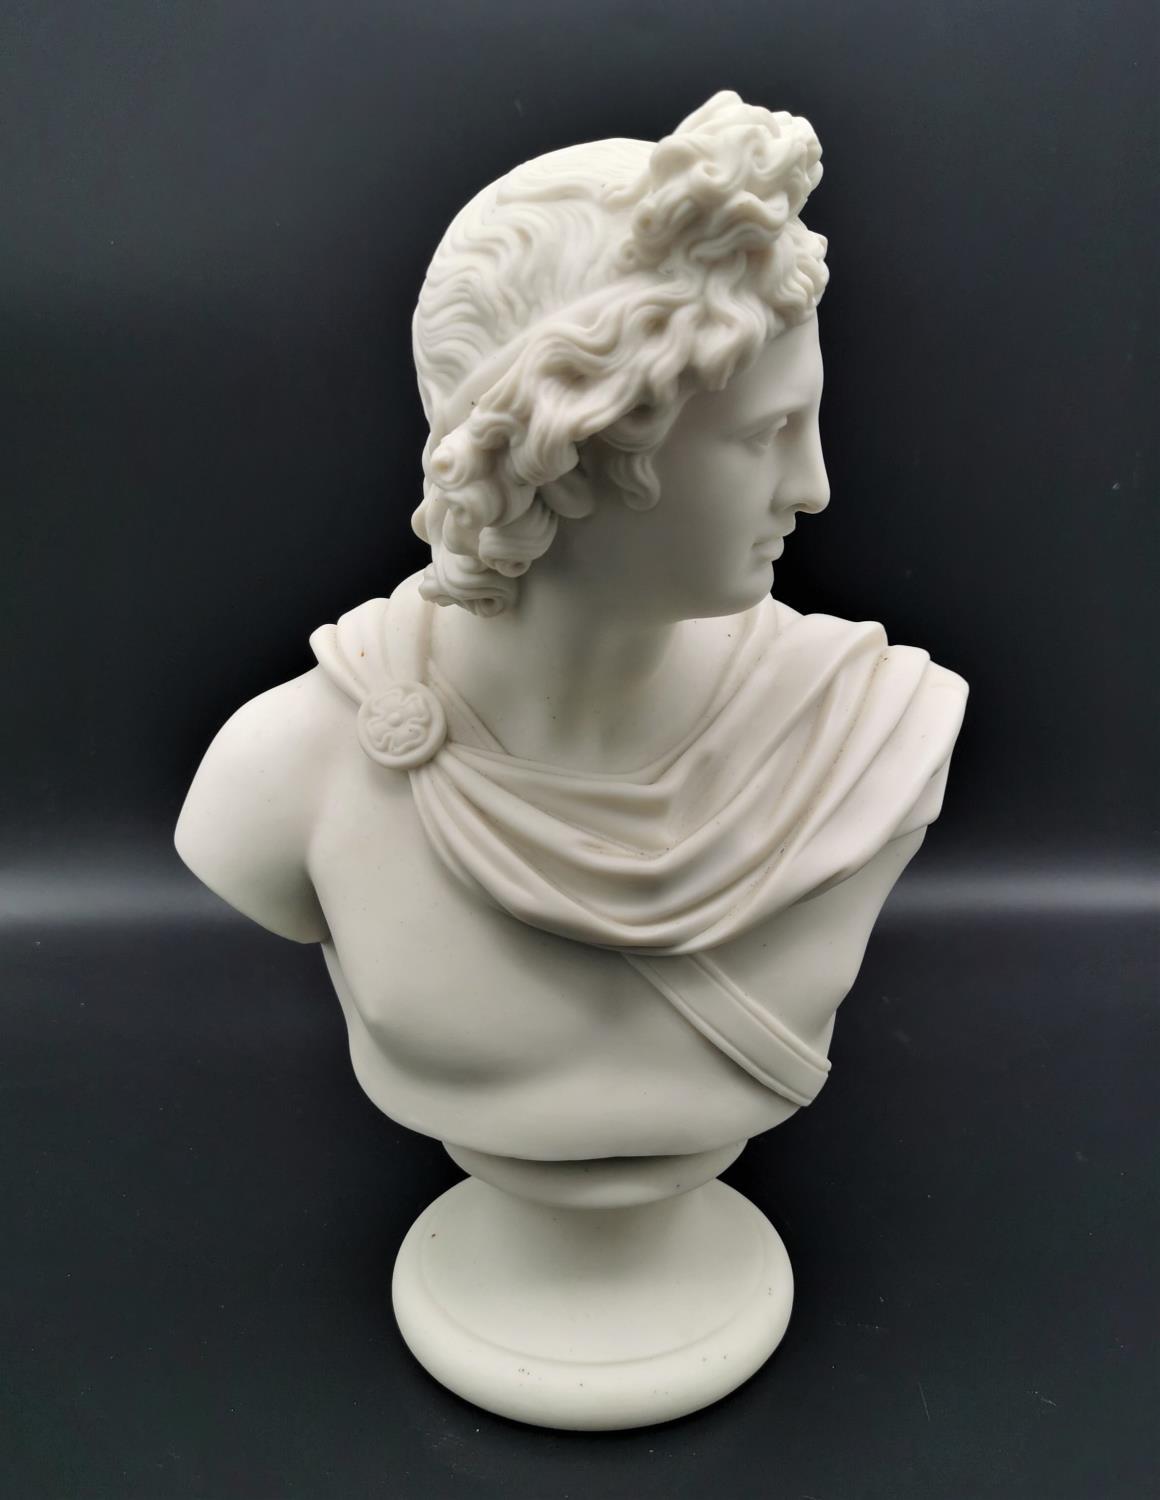 A turn of the century parian ware bust of Apollo after C. Delpech, possibly by Copeland, on a